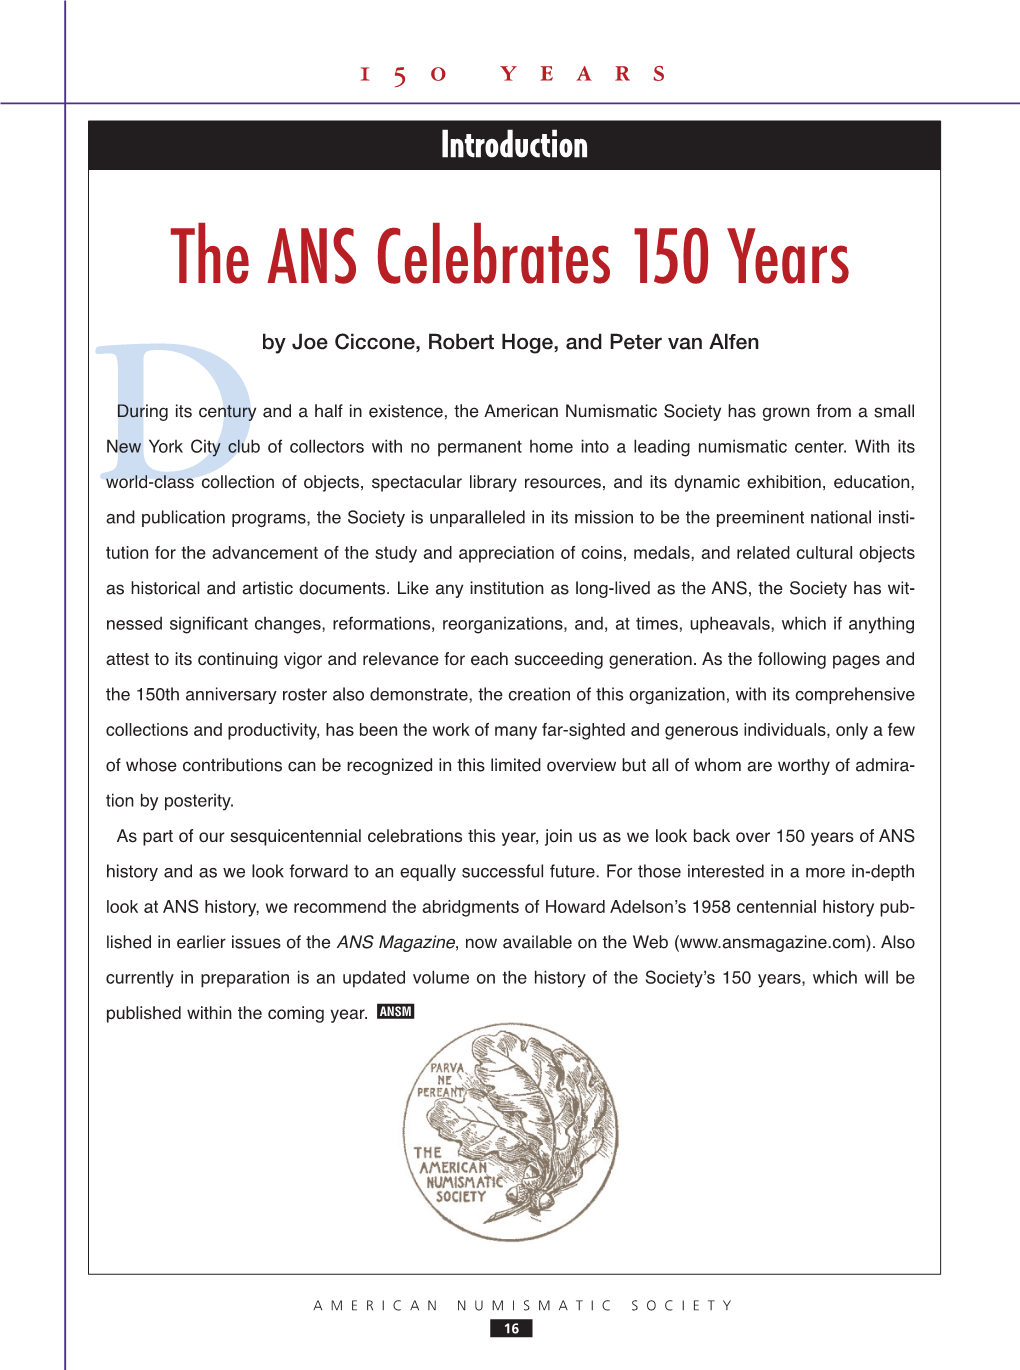 The ANS Celebrates 150 Years